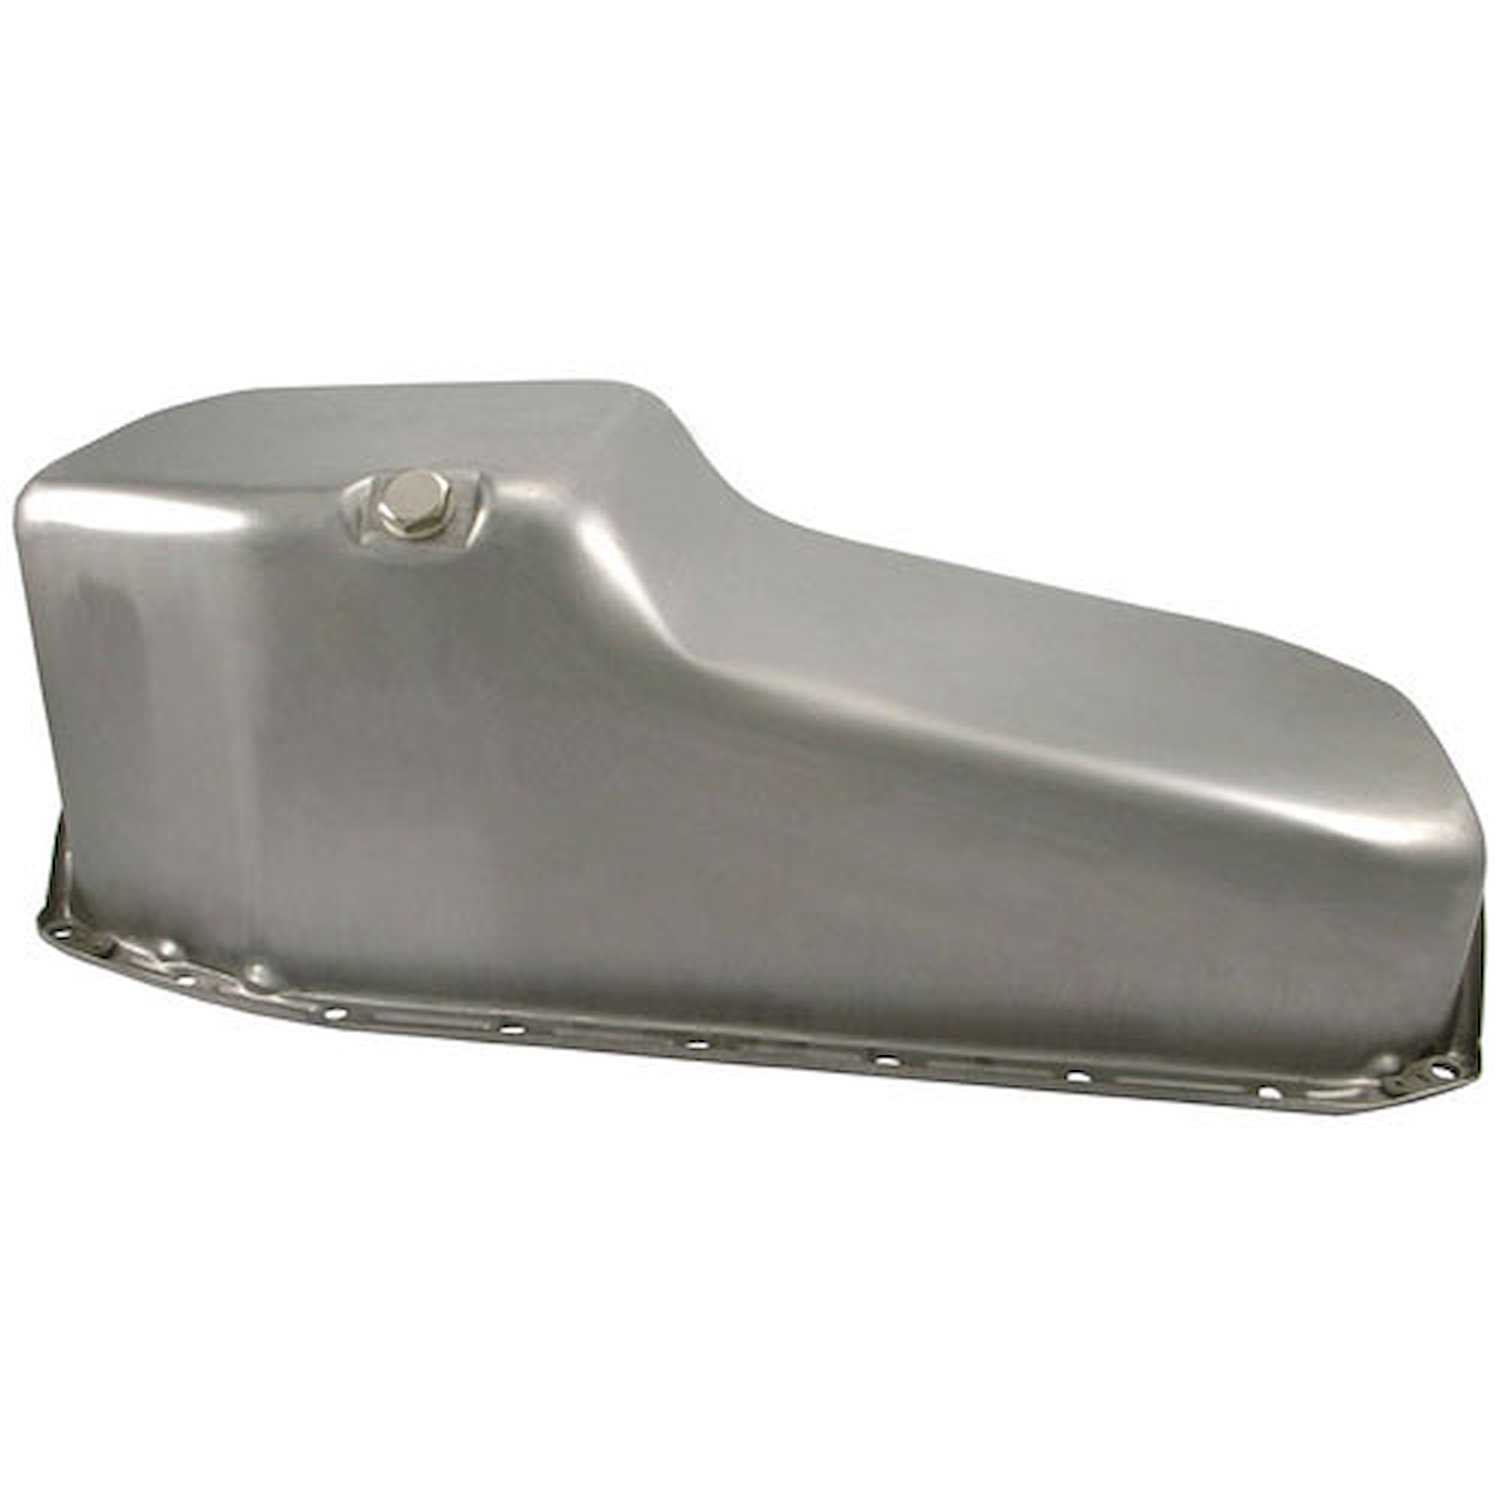 Unplated Oil Pan 1980-85 SB-Chevy 305-350